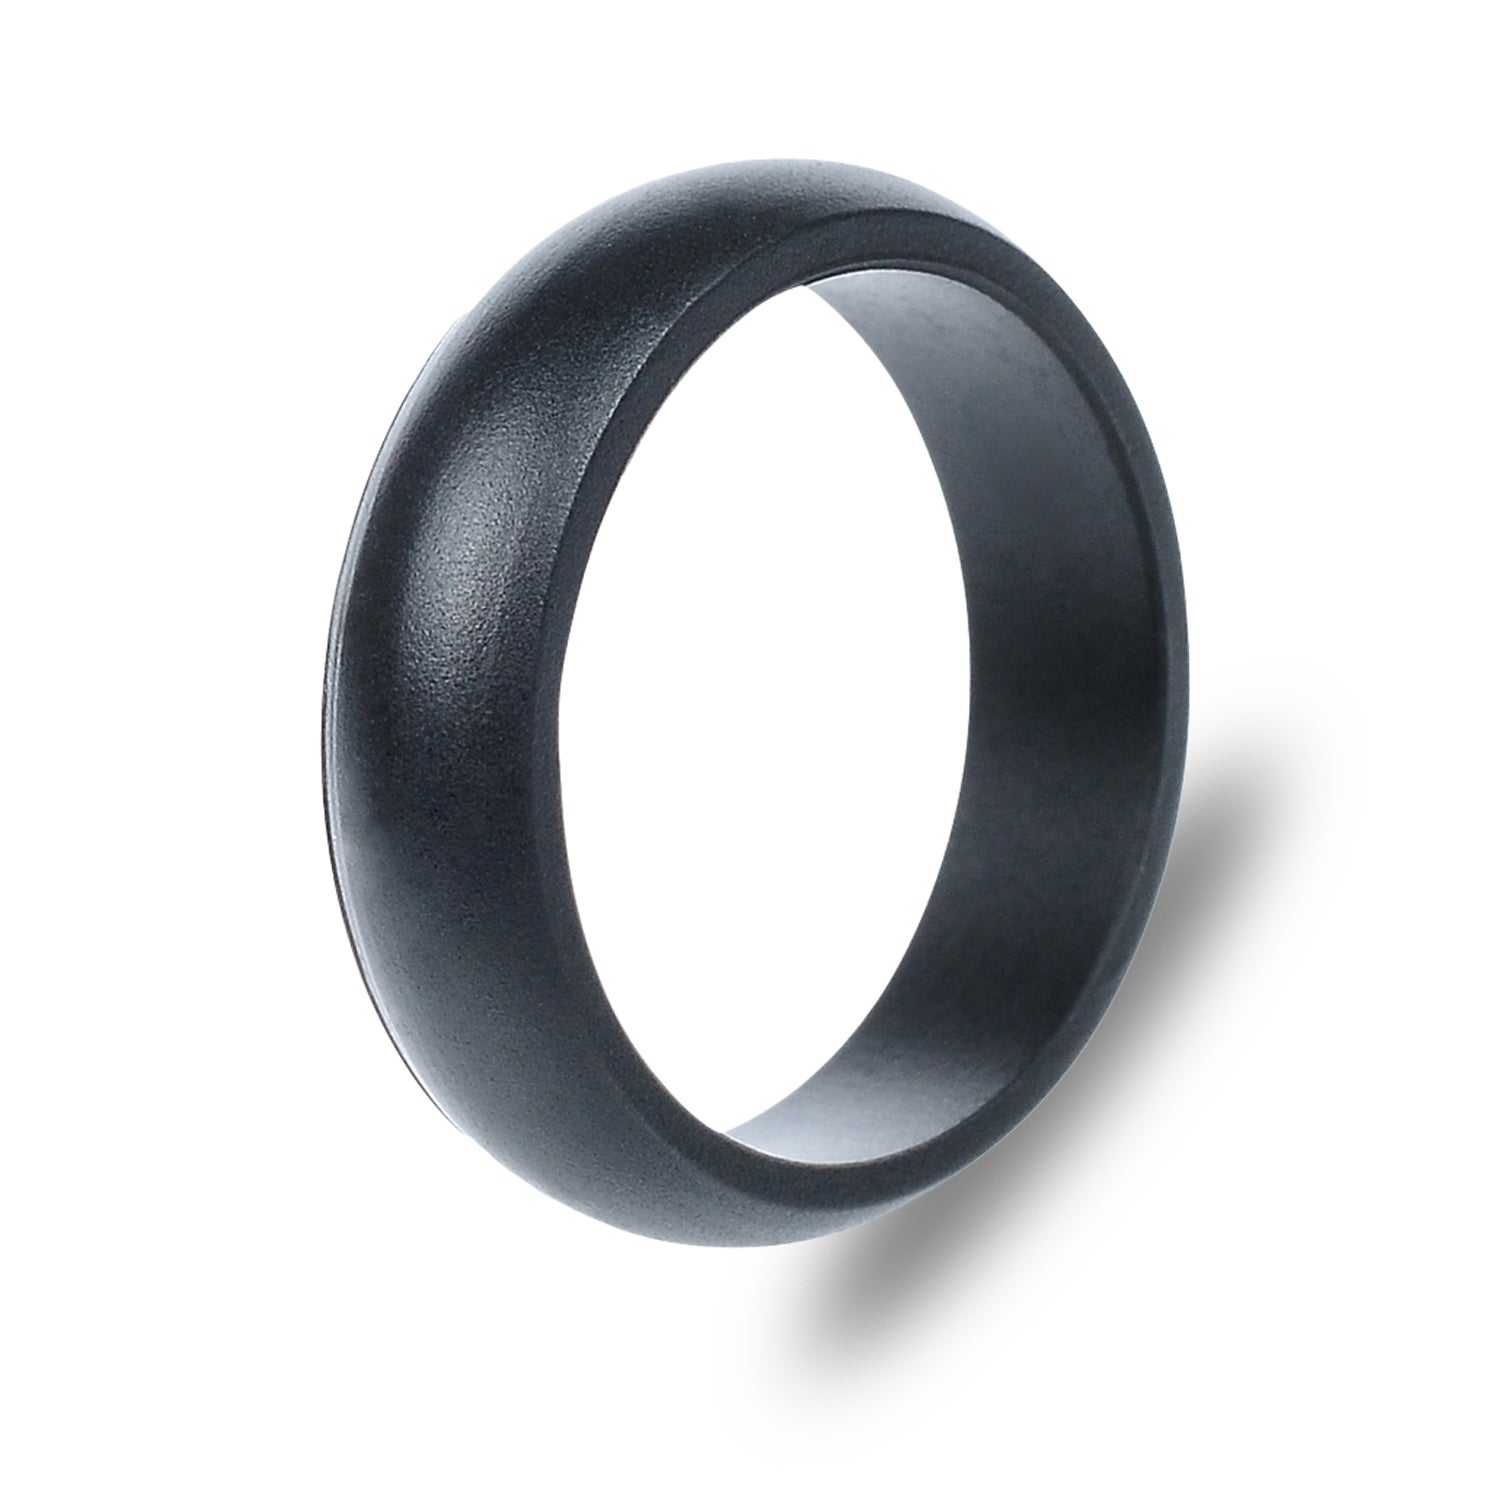 The Twilight - Silicone Ring